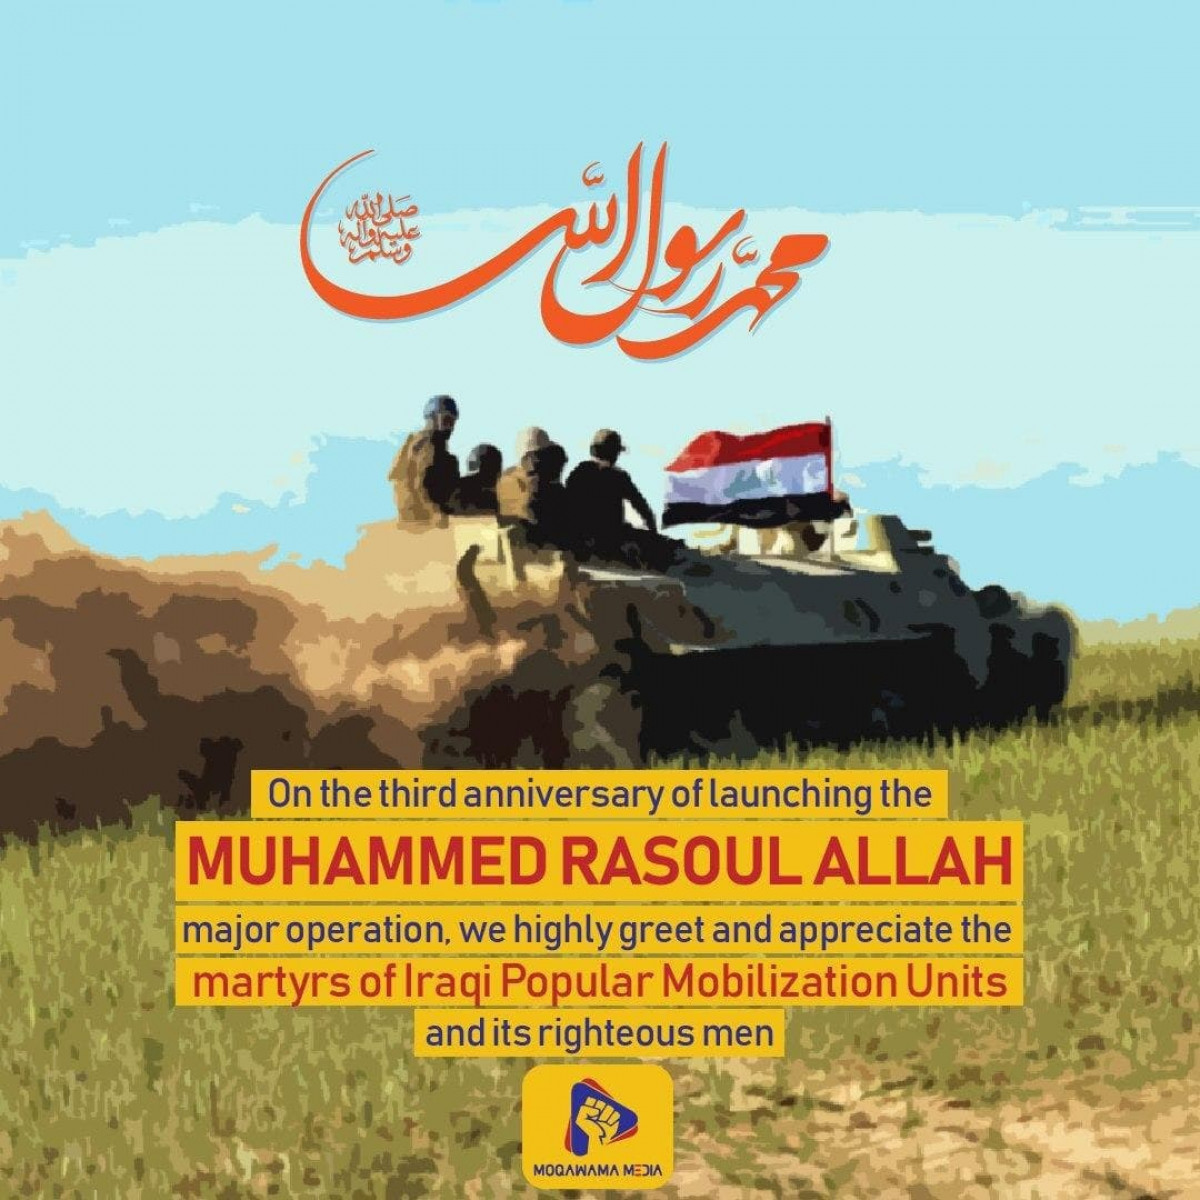 On the third anniversary of launching the MUHAMMED RASOULALLAH major operation